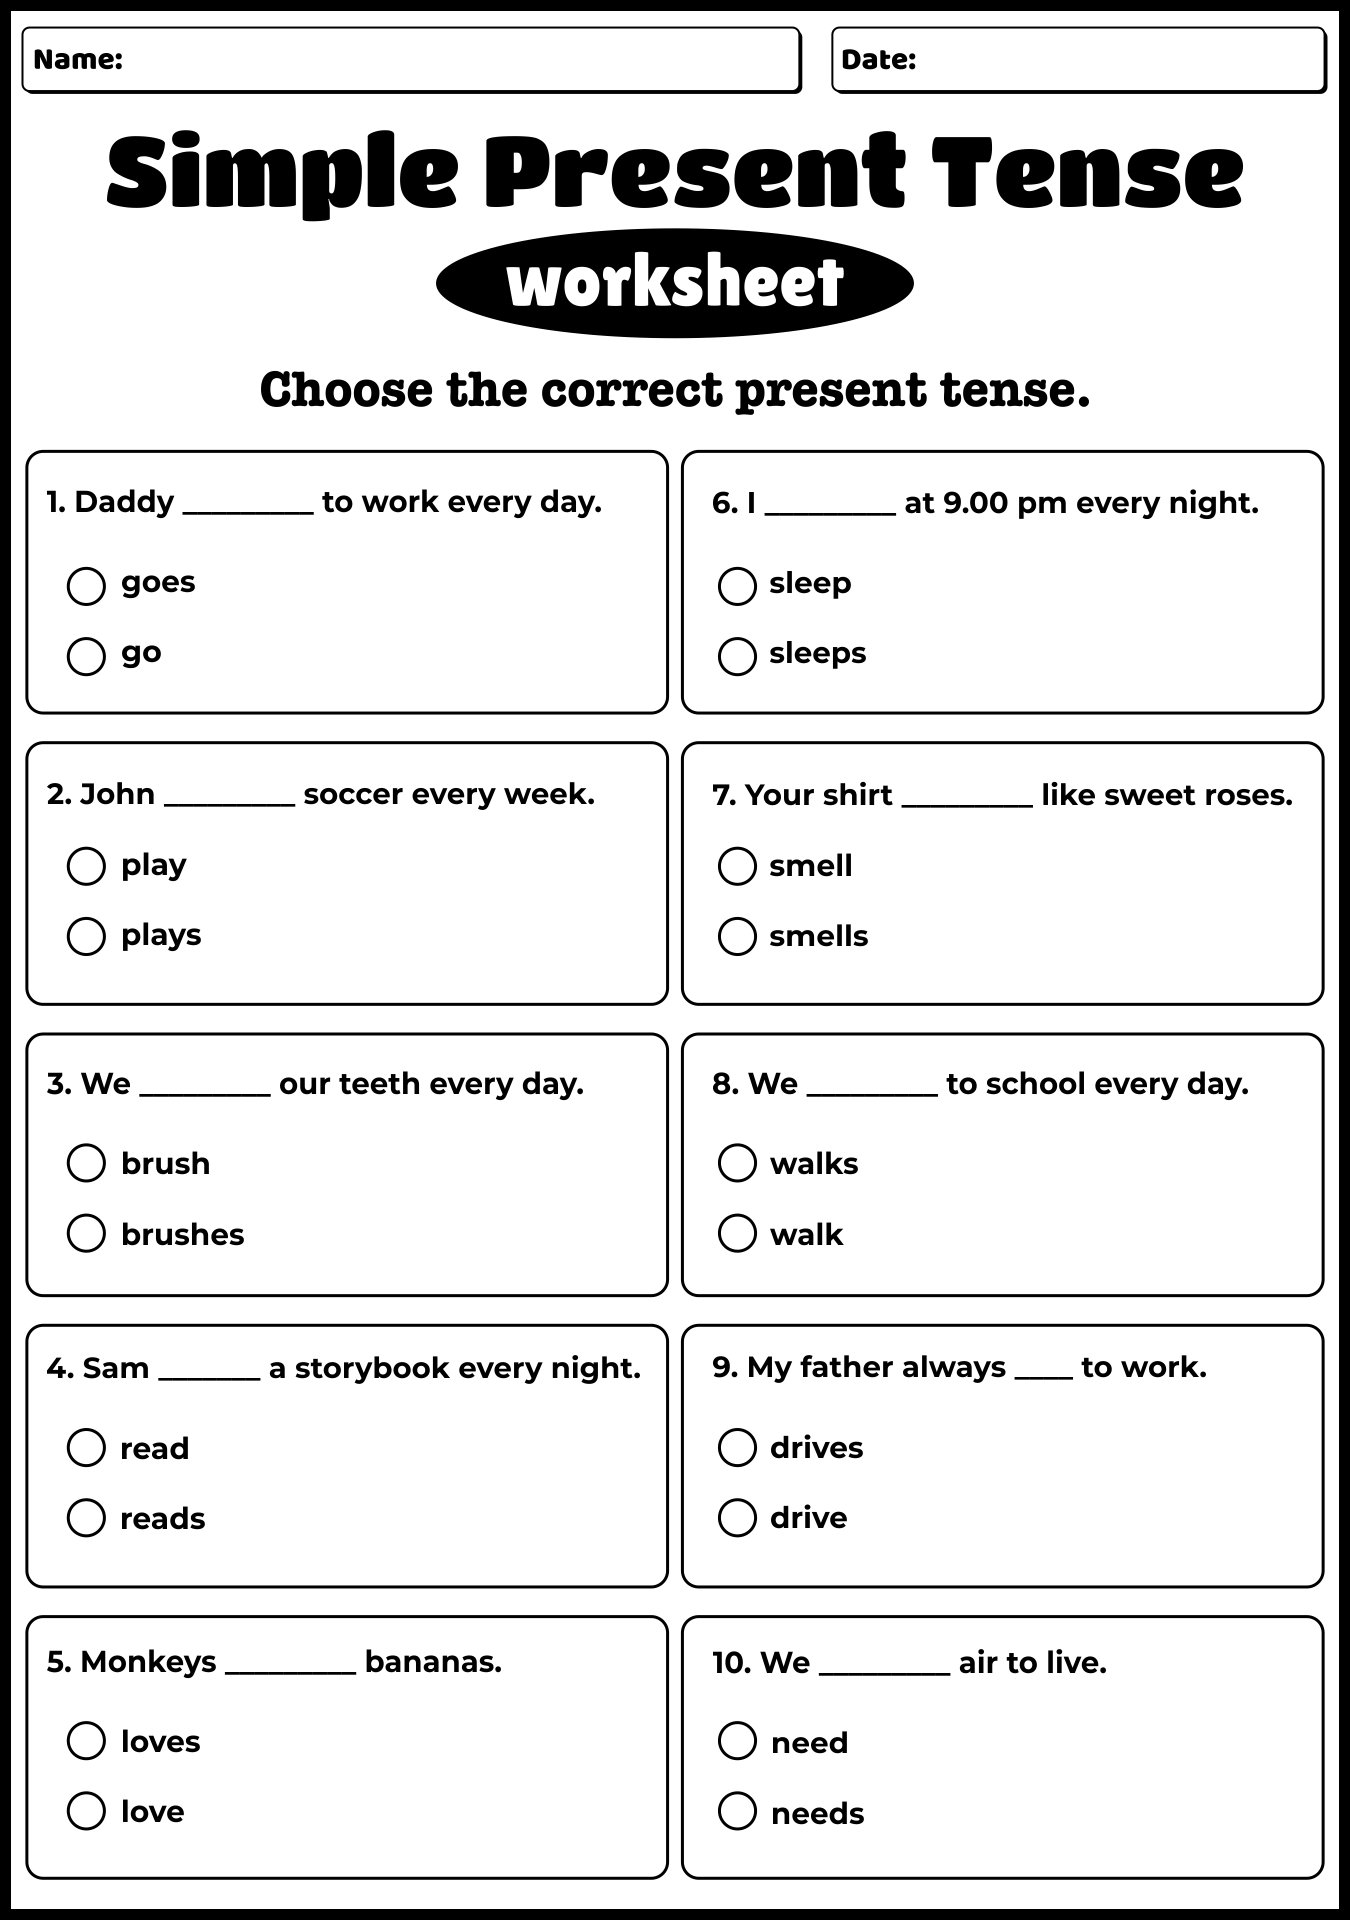 19-best-images-of-present-and-past-tense-worksheets-past-present-future-tense-worksheet-past